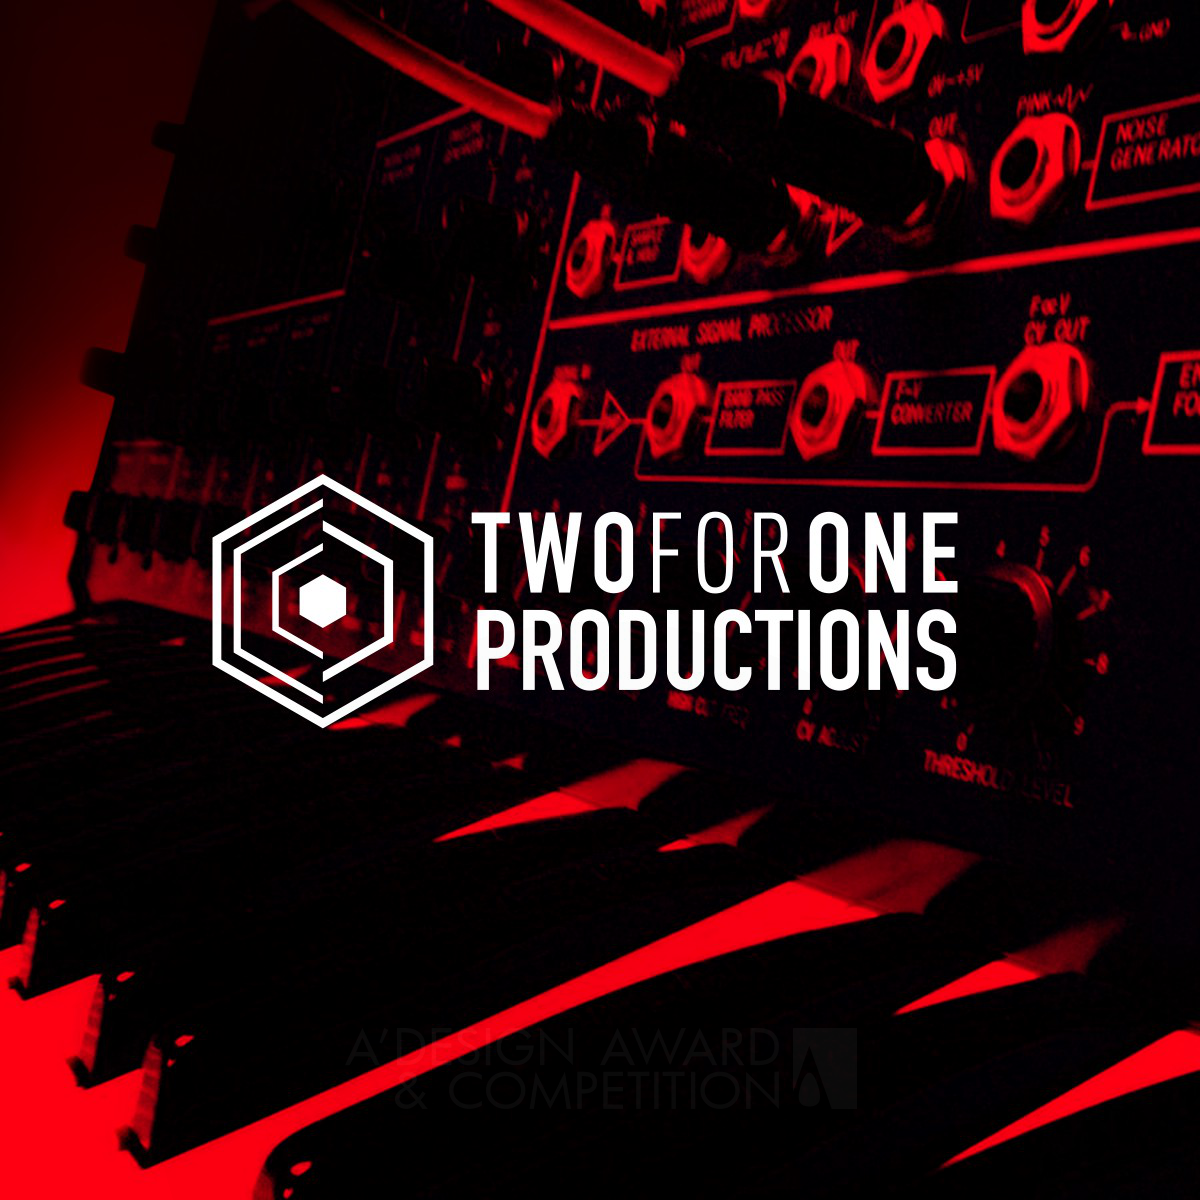 Twoforone Productions